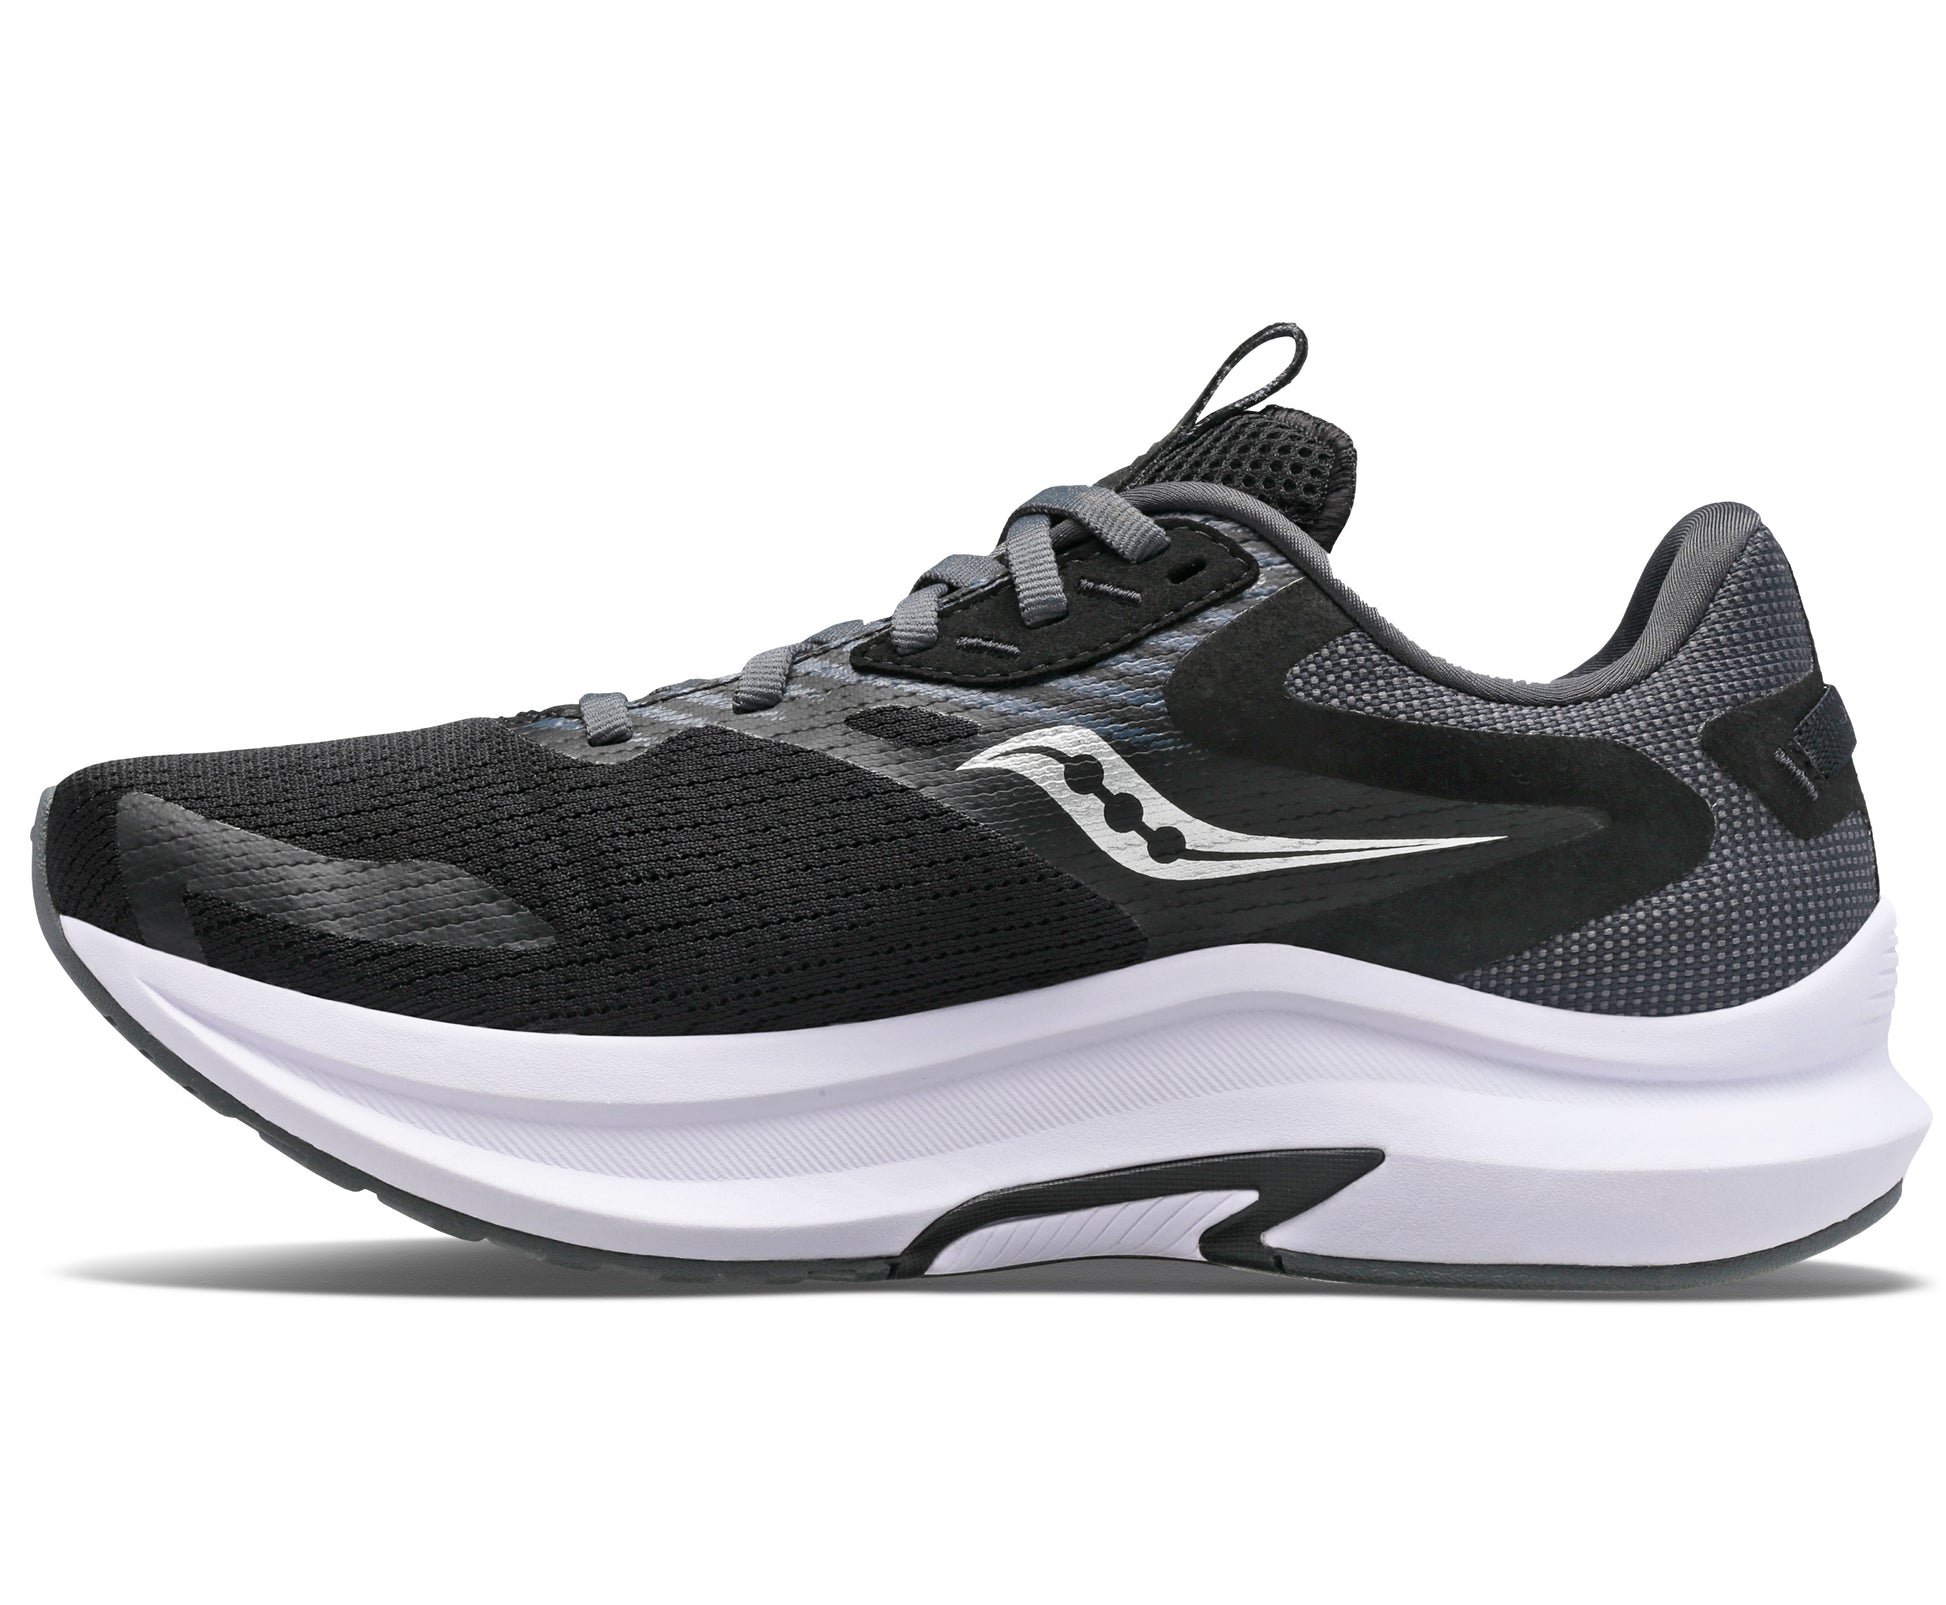 Saucony Axon 2 women's neutral running shoe black, grey, and white